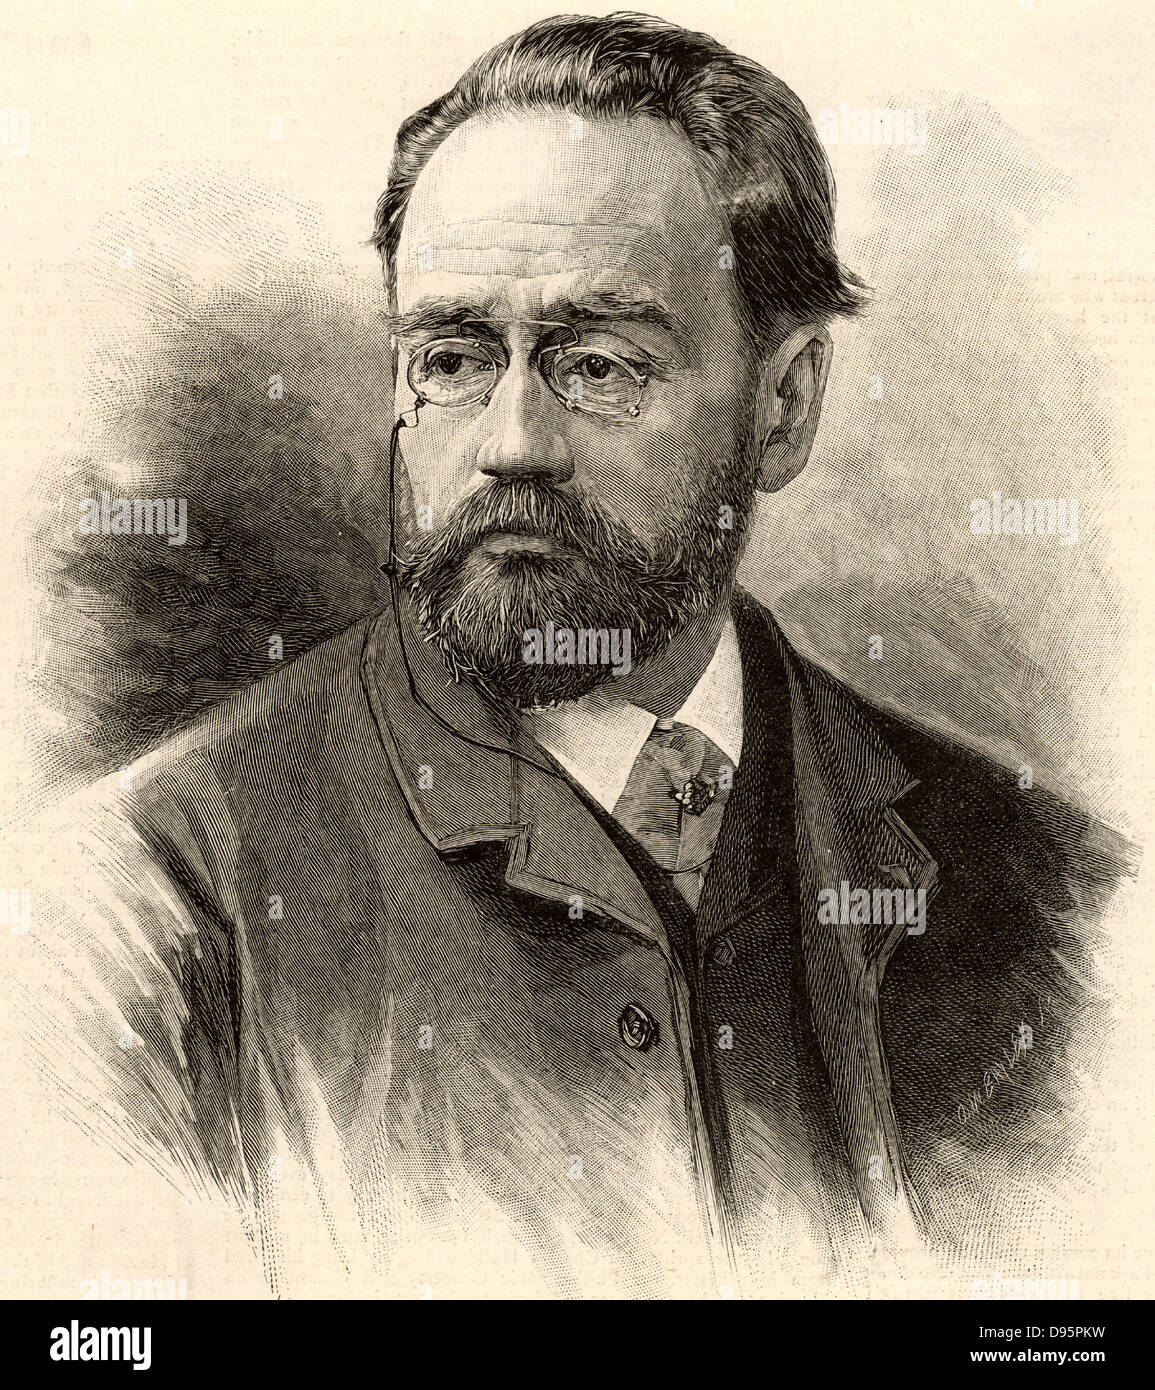 Emile Zola (1840-1902) French journalist and novelist of the Naturalistic school. Engraving published in 1893 when he was invited to give a paper to the conference of the Institute of Journalists in London.  The title of the paper he gave was 'L'Anonymat dans la Presse' (Anonymity in Journalism). Engraving. Stock Photo